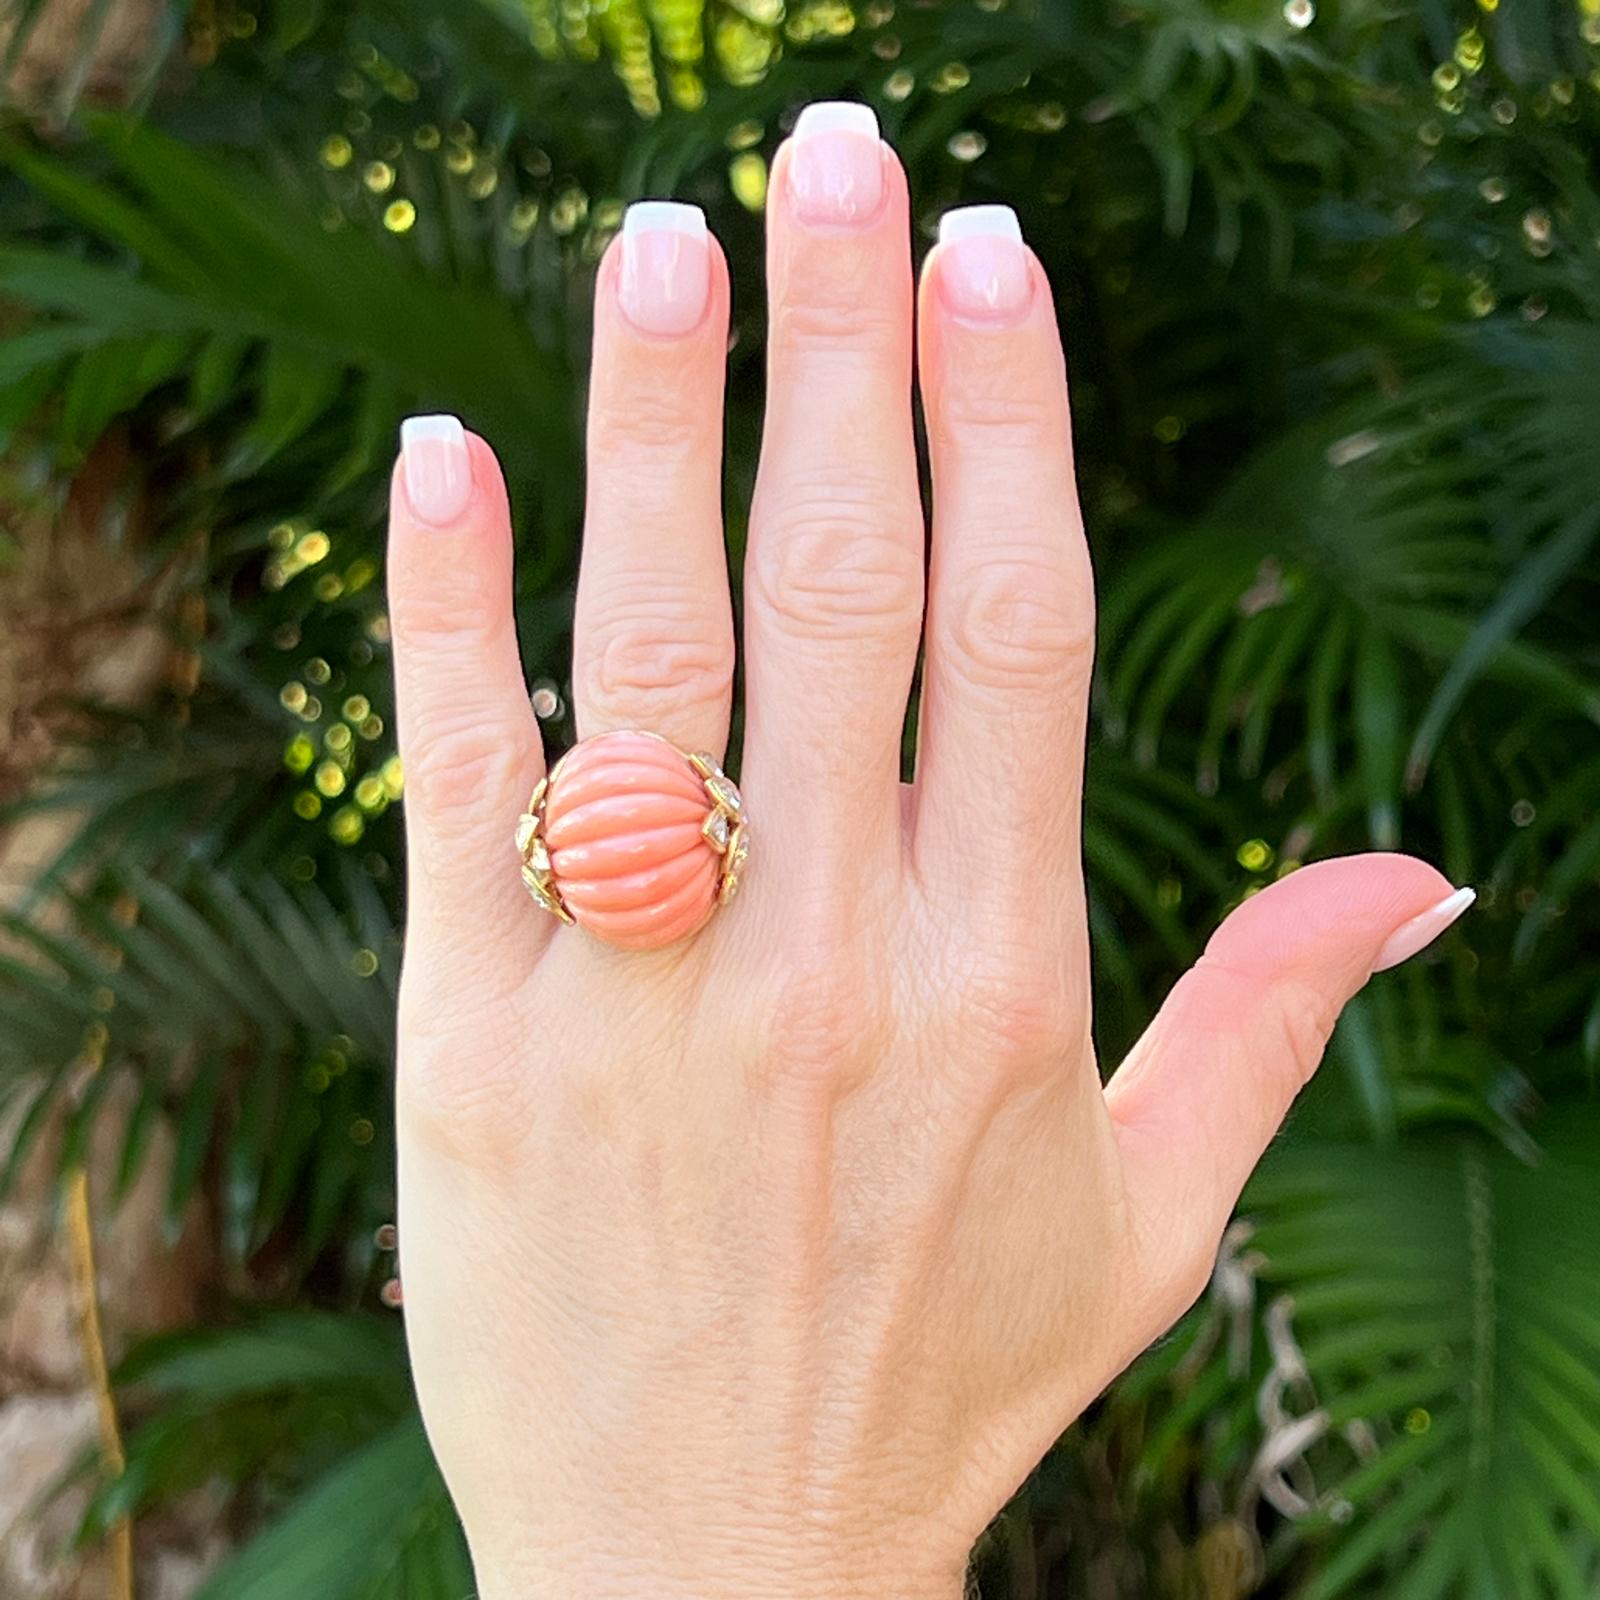 Beautiful carved coral and diamond dome cocktail ring handcrafted in 18 karat yellow gold. The ring features a coloful orange carved ribbed coral gemstone set with 12 round brilliant cut diamond accents. The diamonds weigh approximately 1.00 CTW and